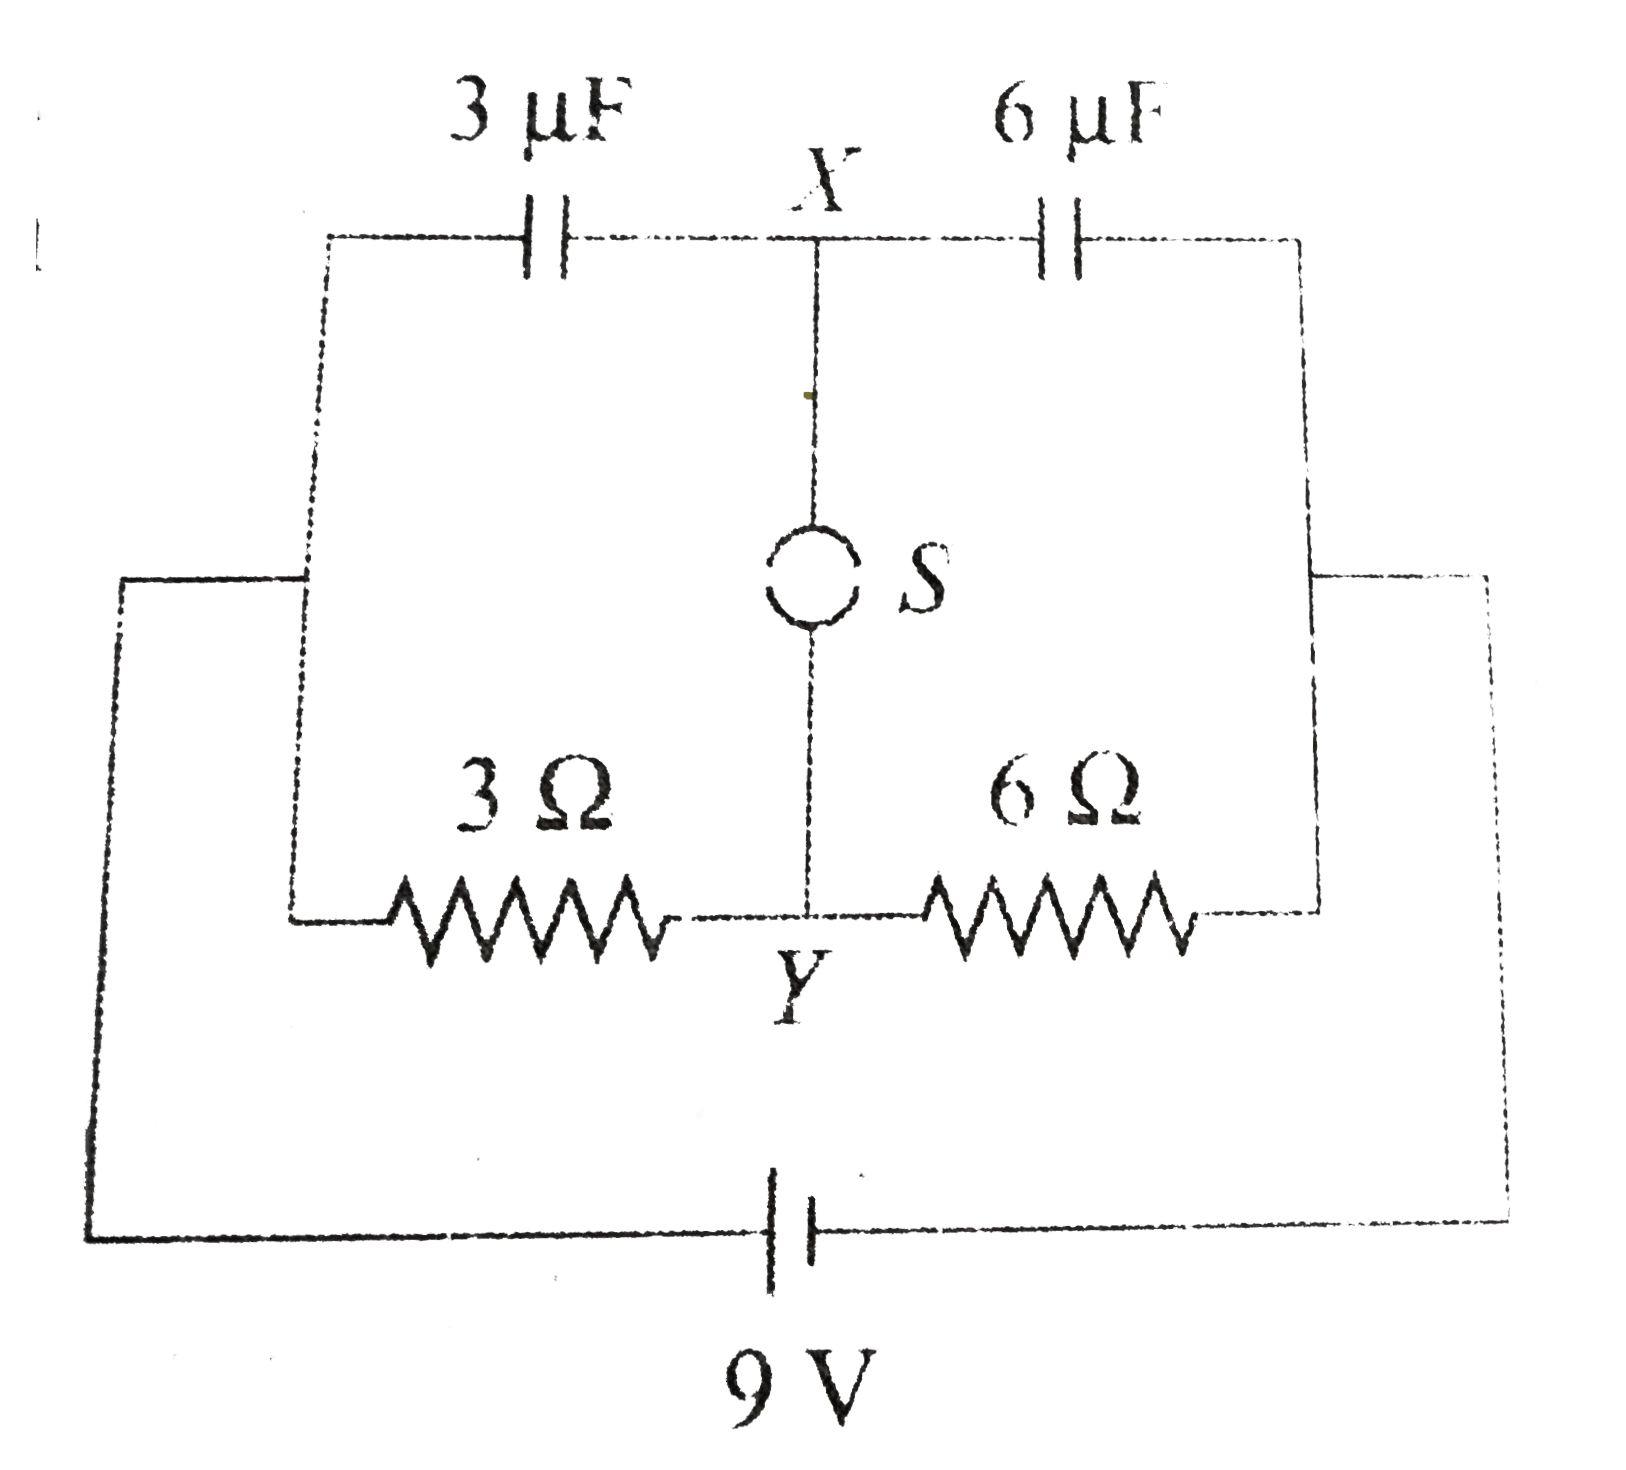 A circuit is connected as shown in figure with the switch S open. When the switch is closed, the total amount of charge that flows from Y to X is